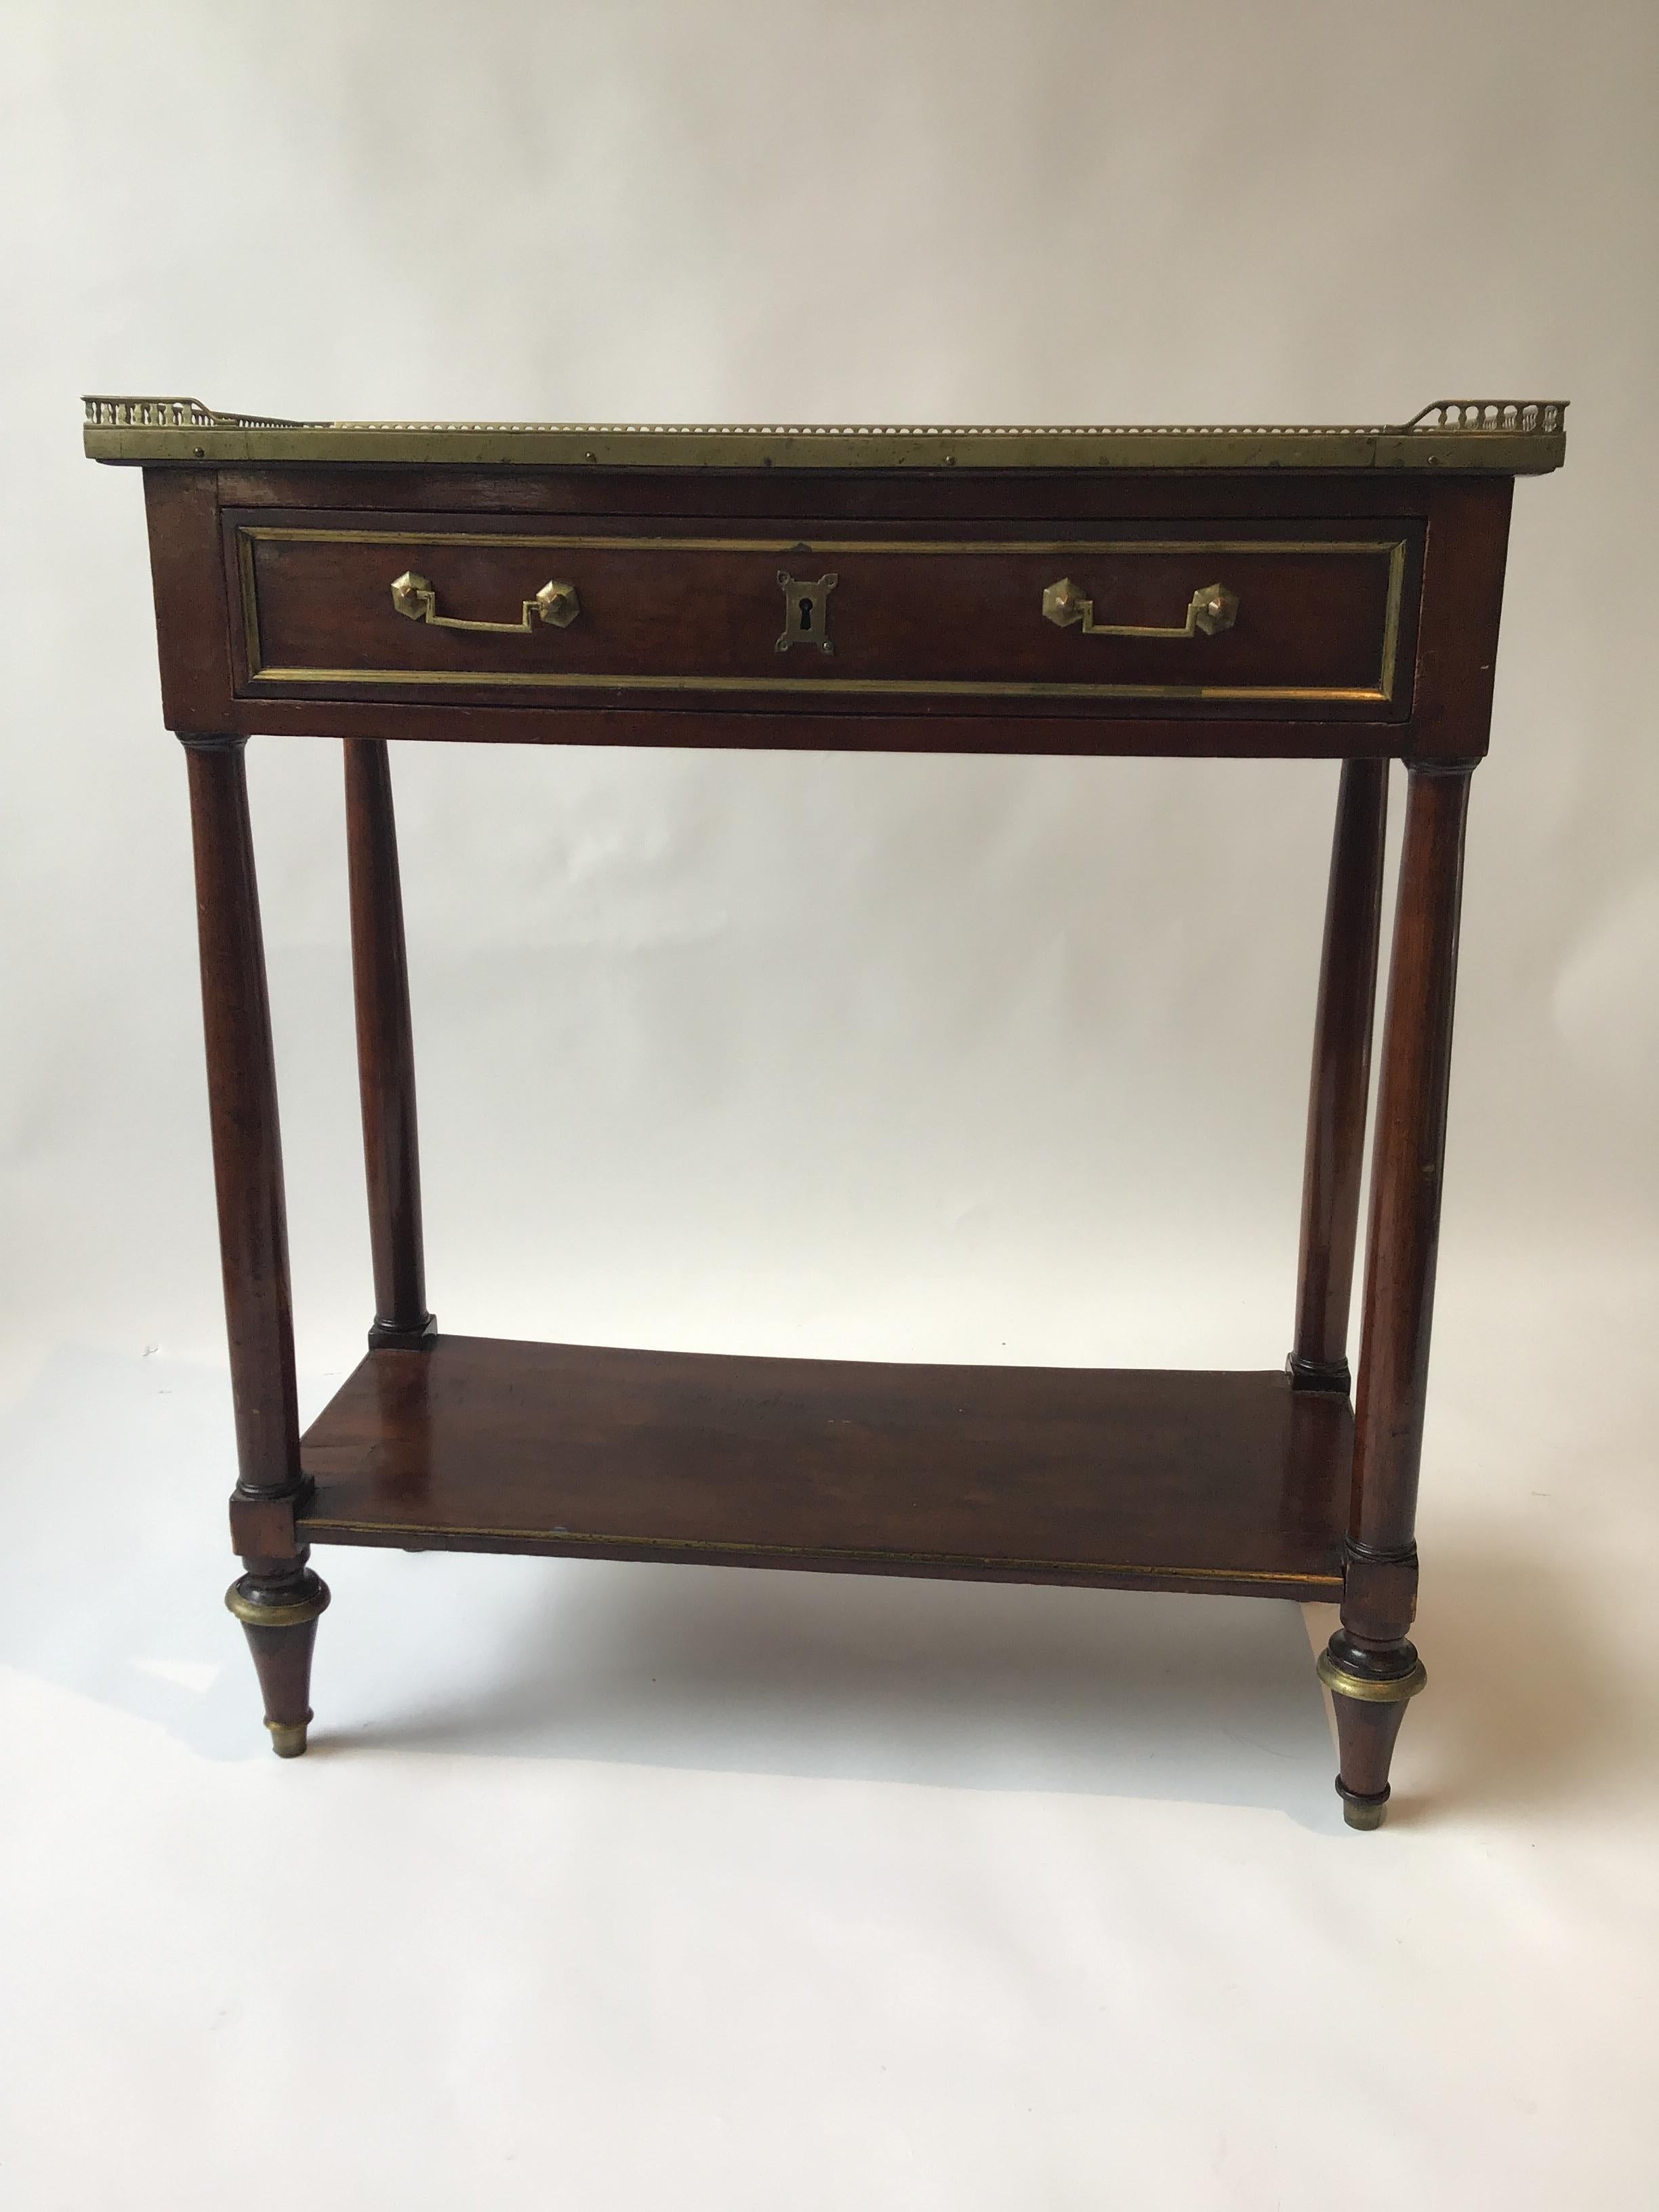 1880s French Regency marble top console with brass gallery. From a Scarsdale, NY estate.